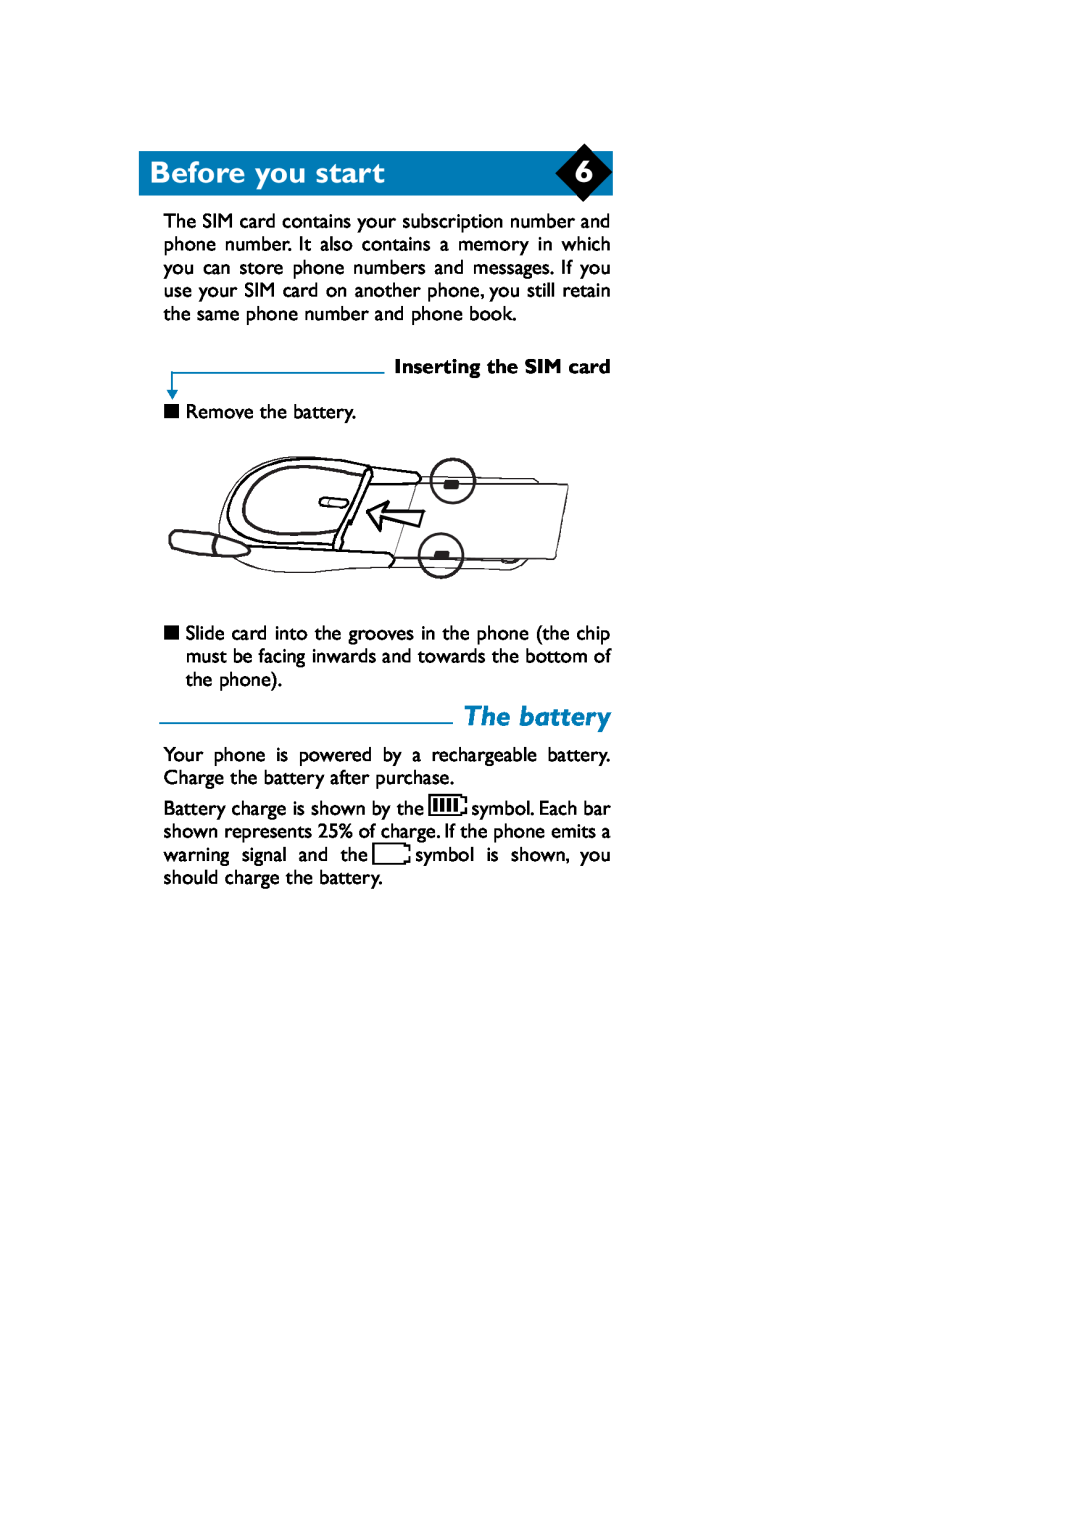 Philips TCD808/A9 user manual The battery, Inserting the SIM card, Before you start 